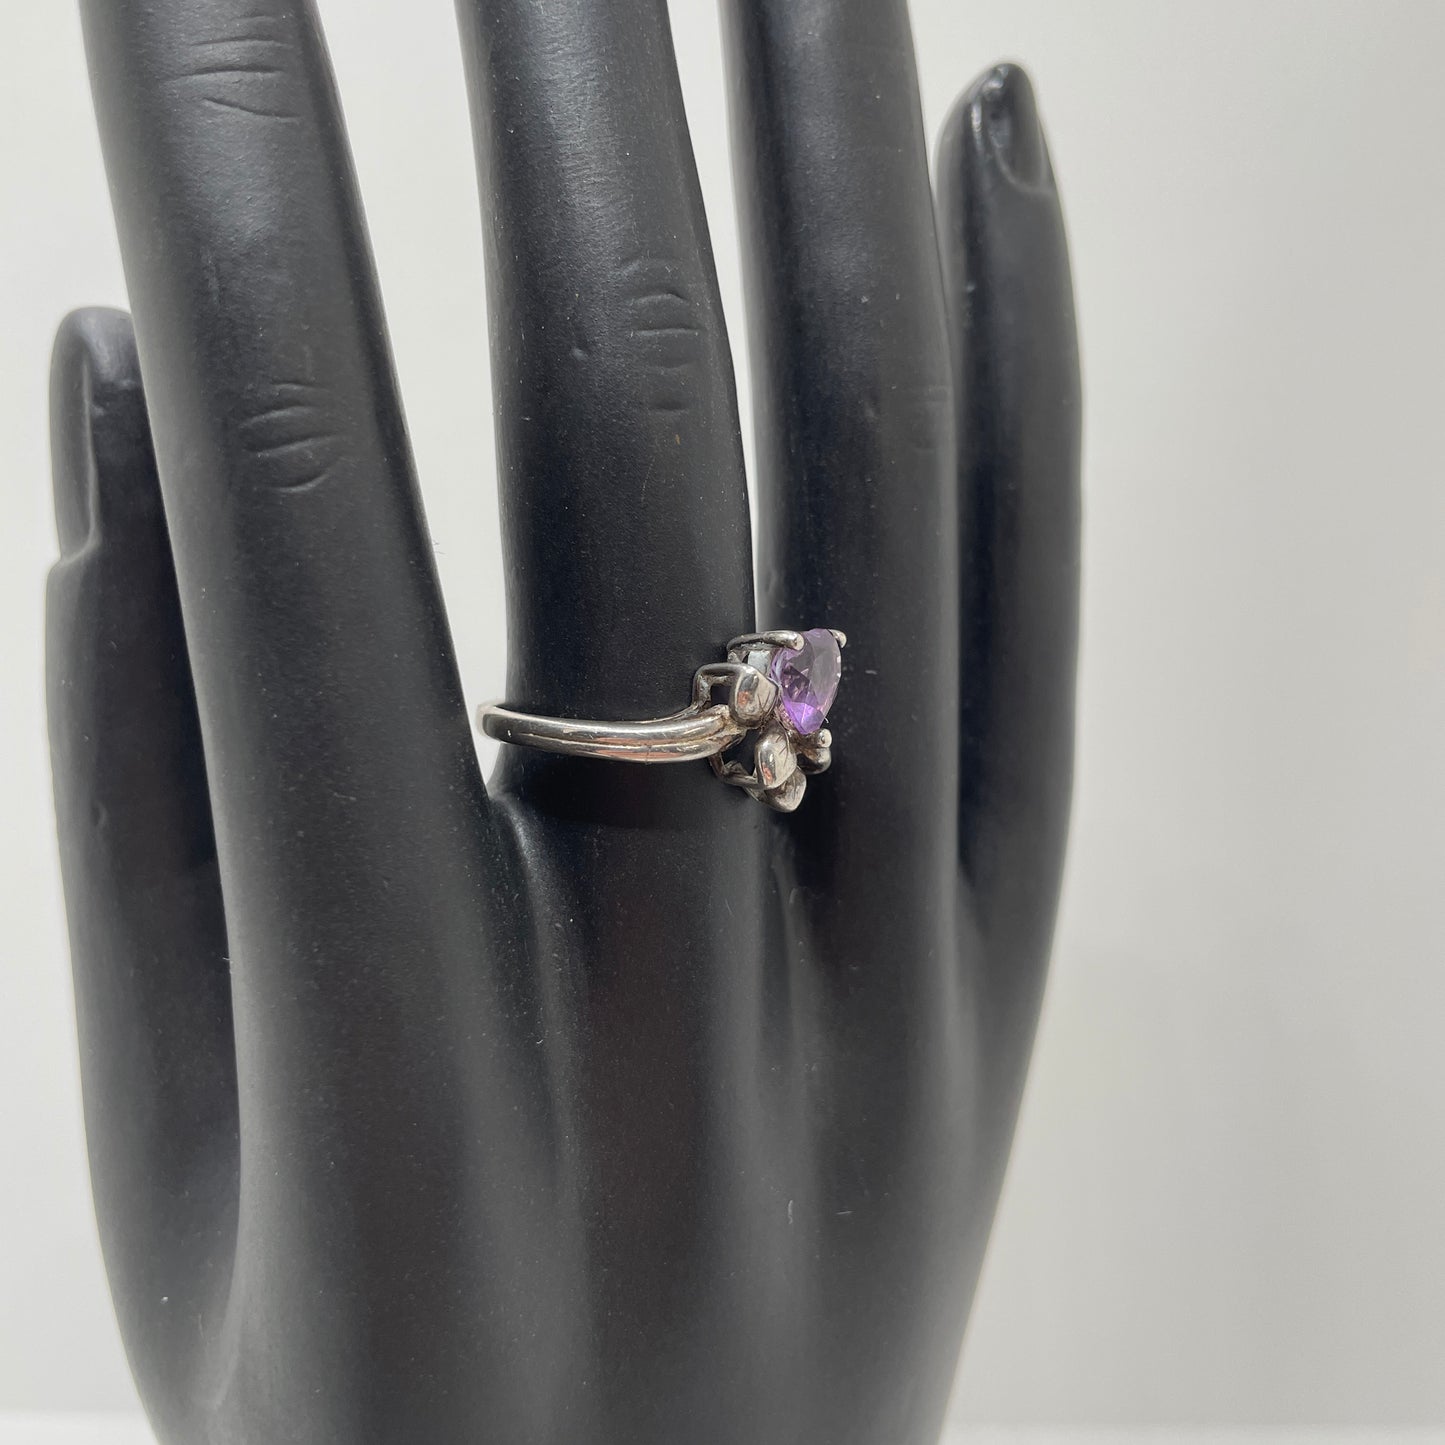 Vintage Sterling Silver Amethyst Heart Ring - Size 9